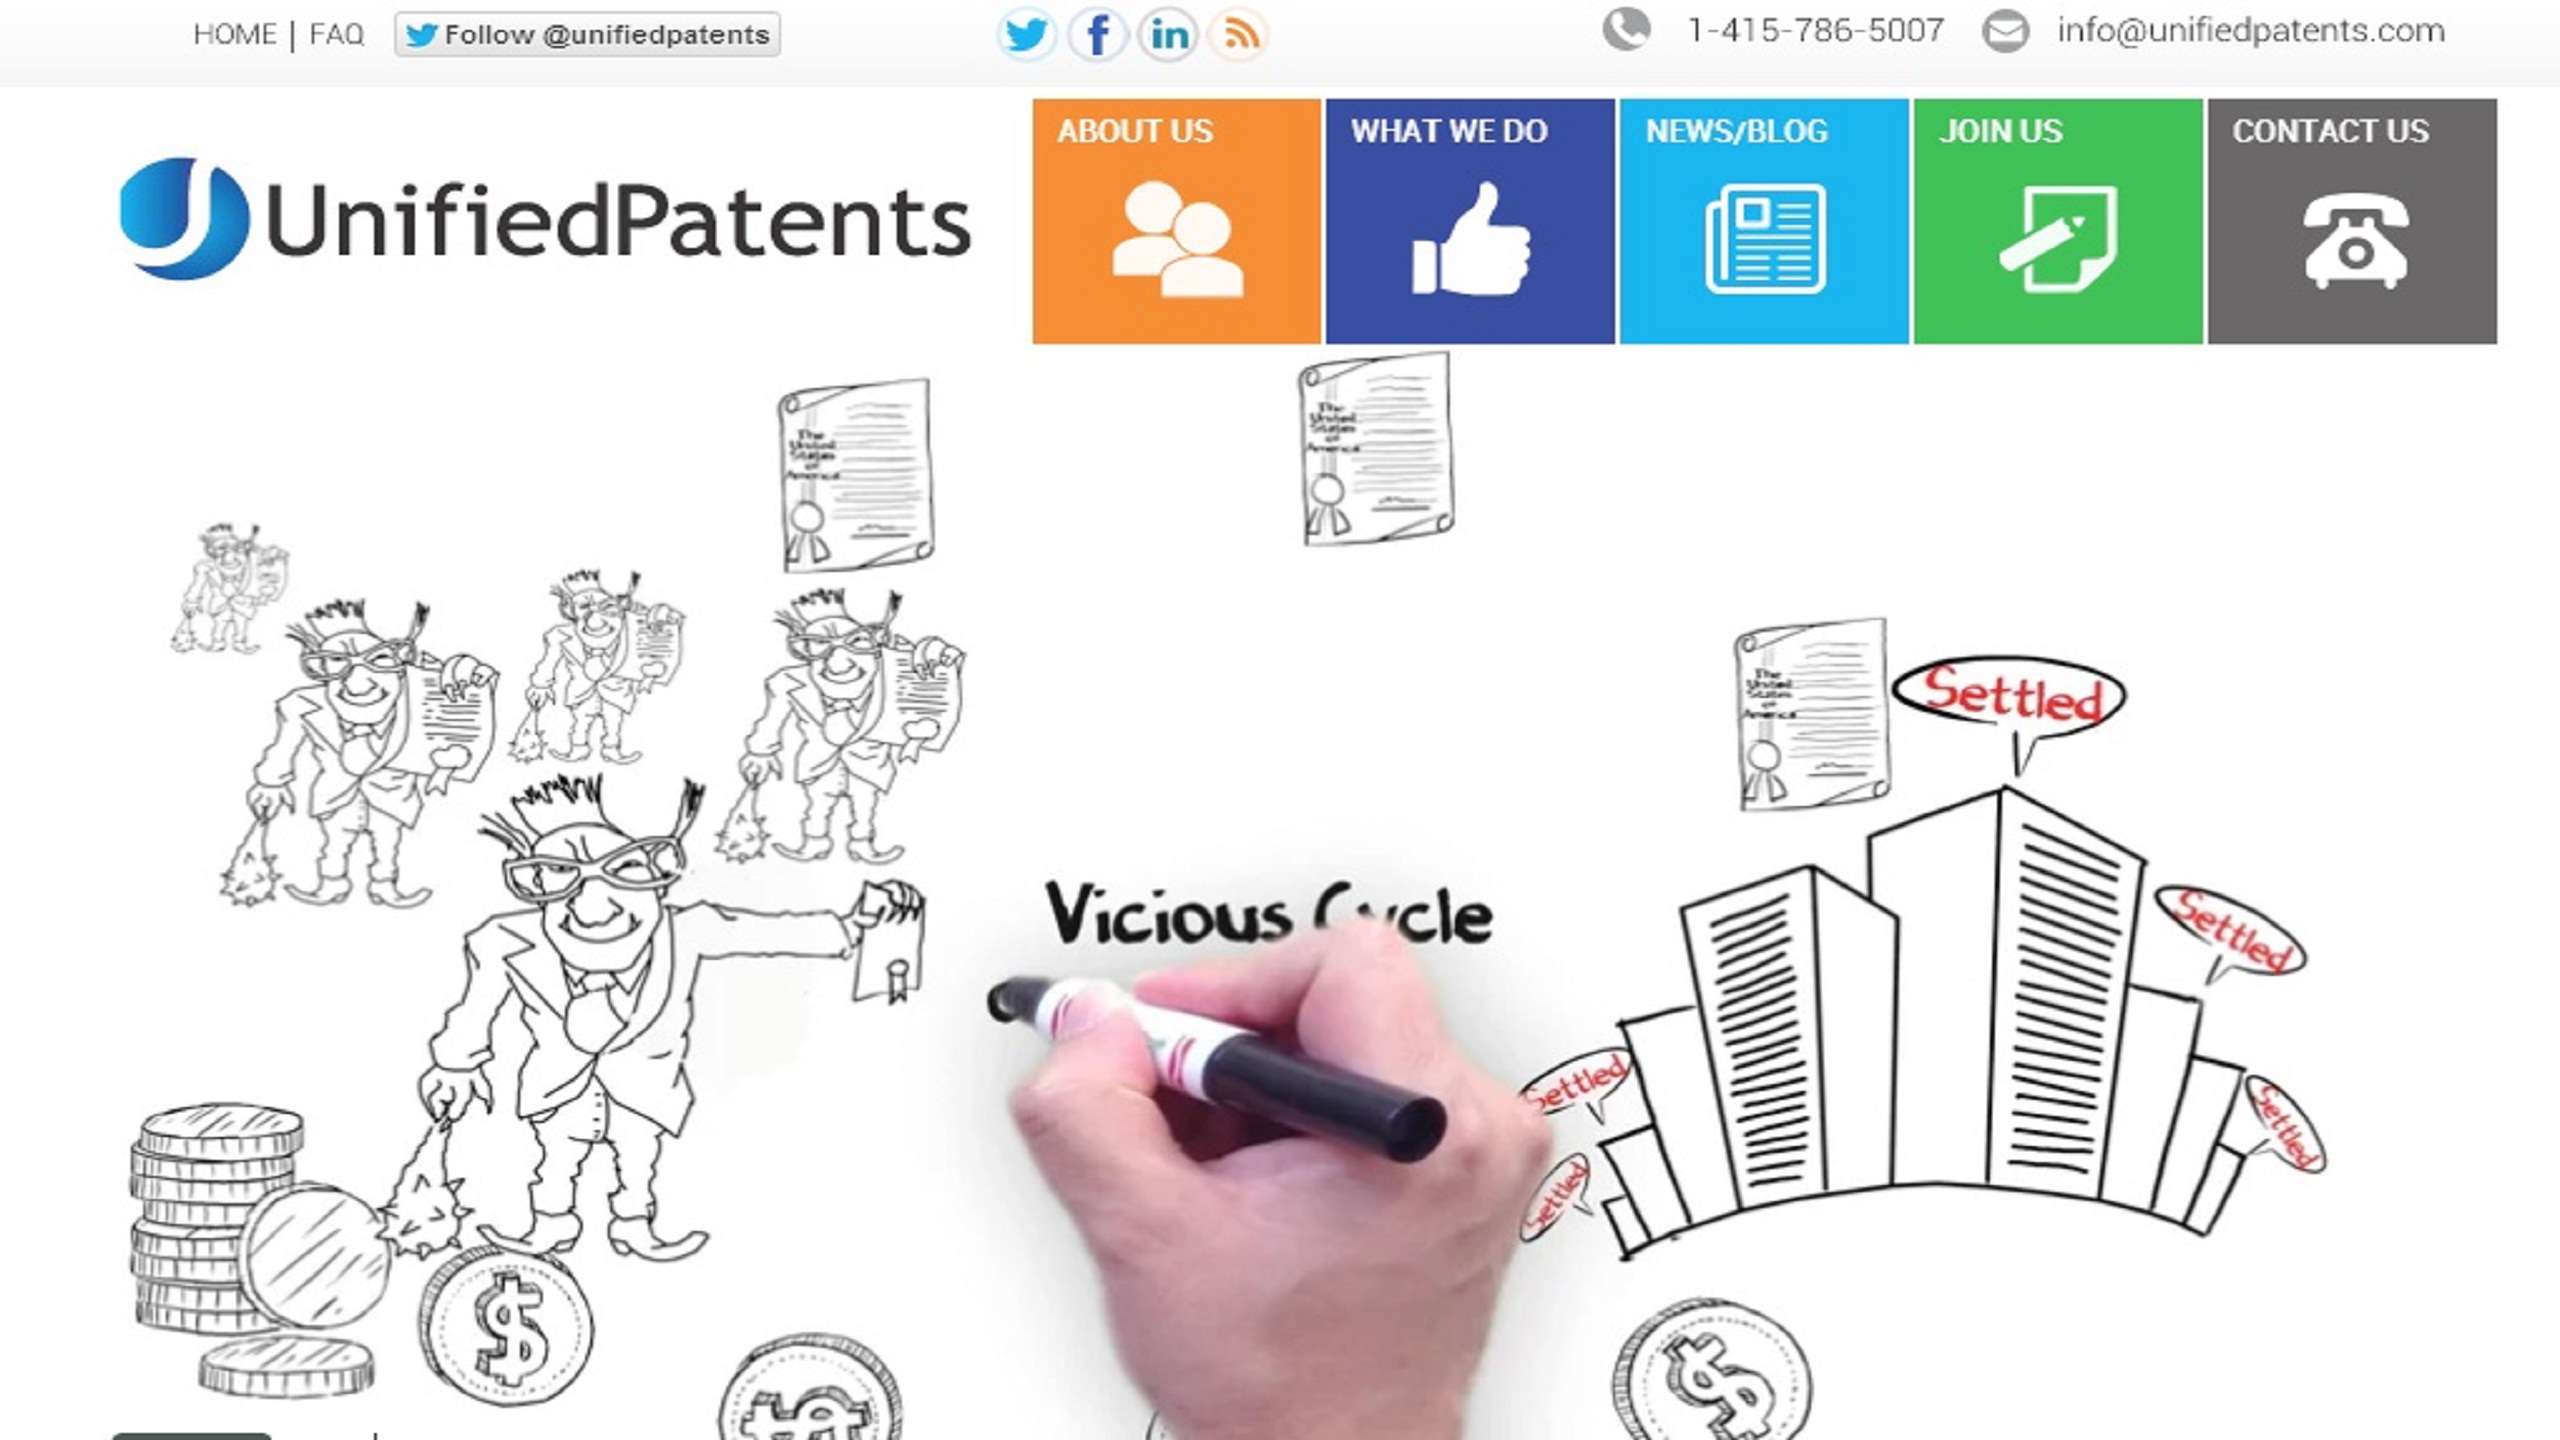 UnifiedPatents provides patent, trademark and copyright services in the USA. By protecting important areas of technology, unified mitigates  NPE risk for its members most important products and services. Visit here: http://unifiedpatents.com/2013/09/23/unified-patents-challenges-clouding-ip-patent-seeks-to-push-patent-trolls-out-of-cloud-storage/